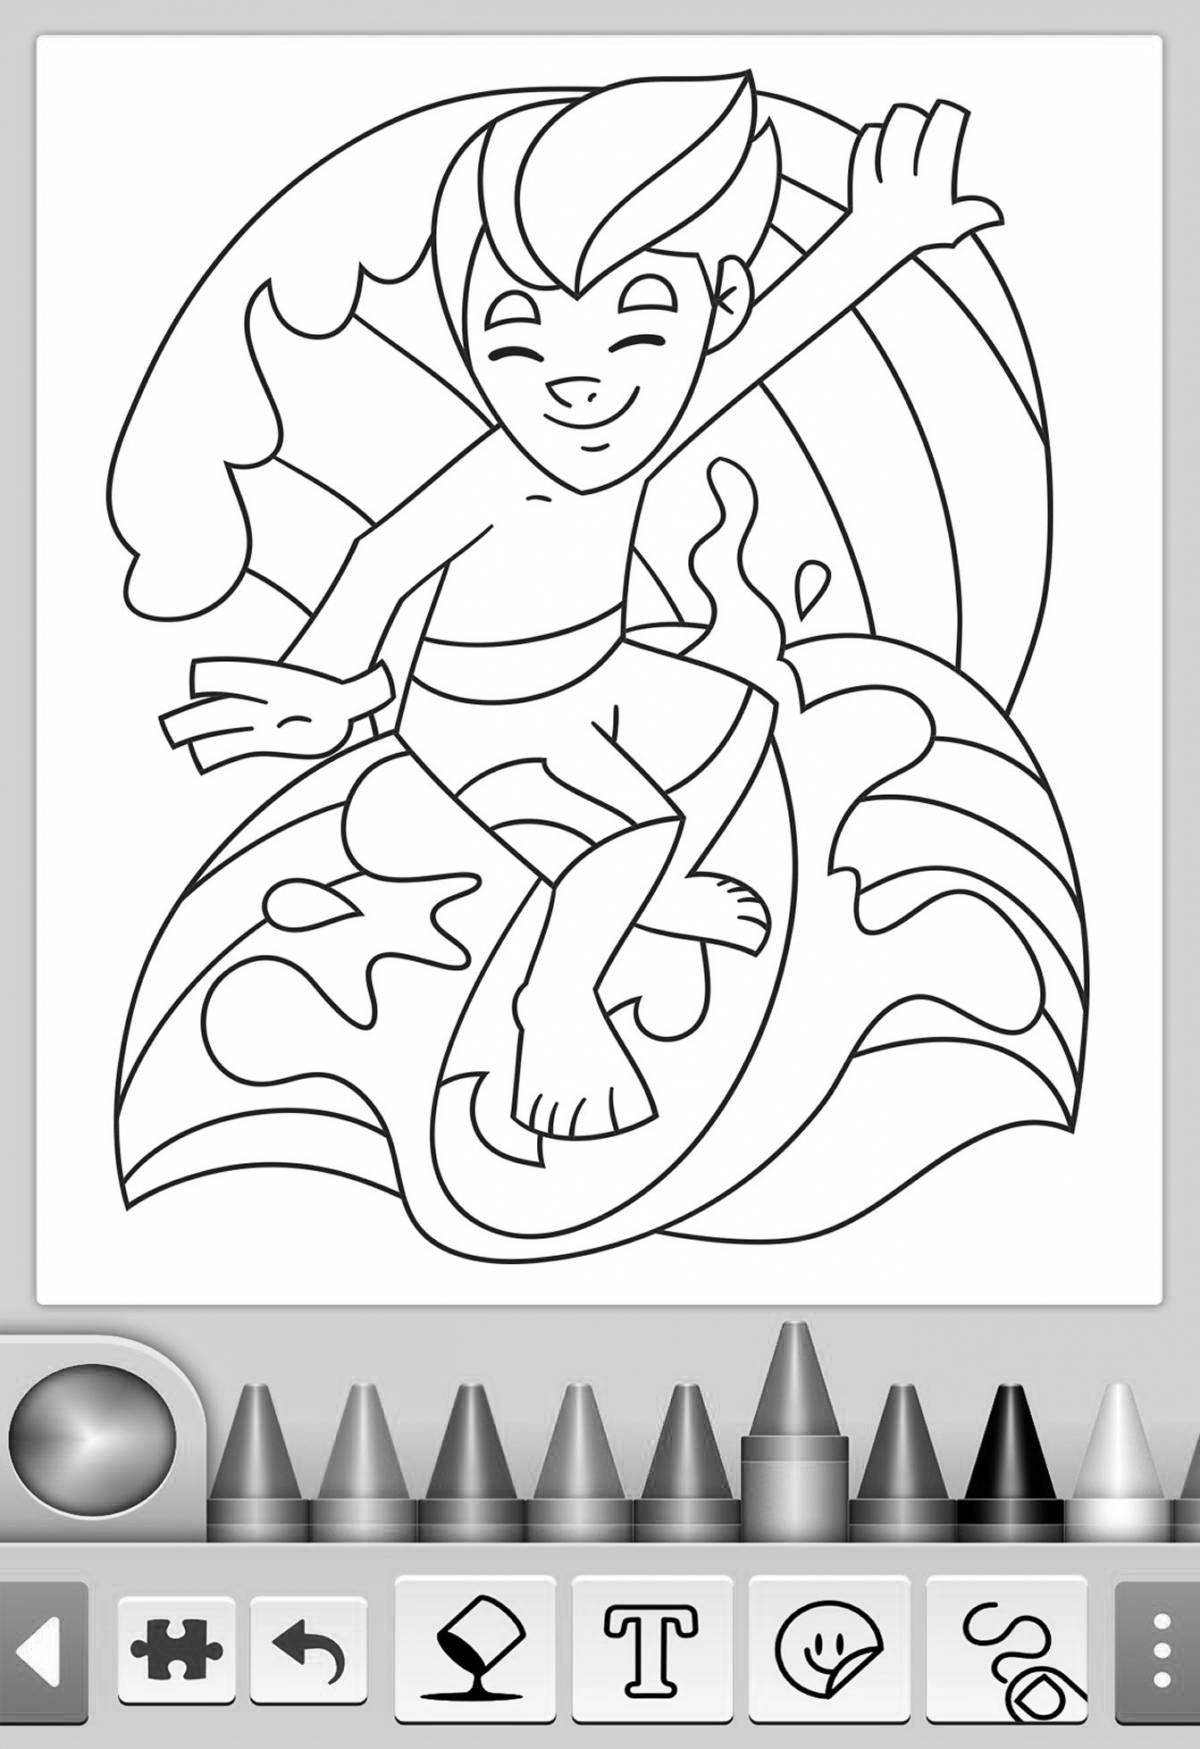 Funny figurine coloring page